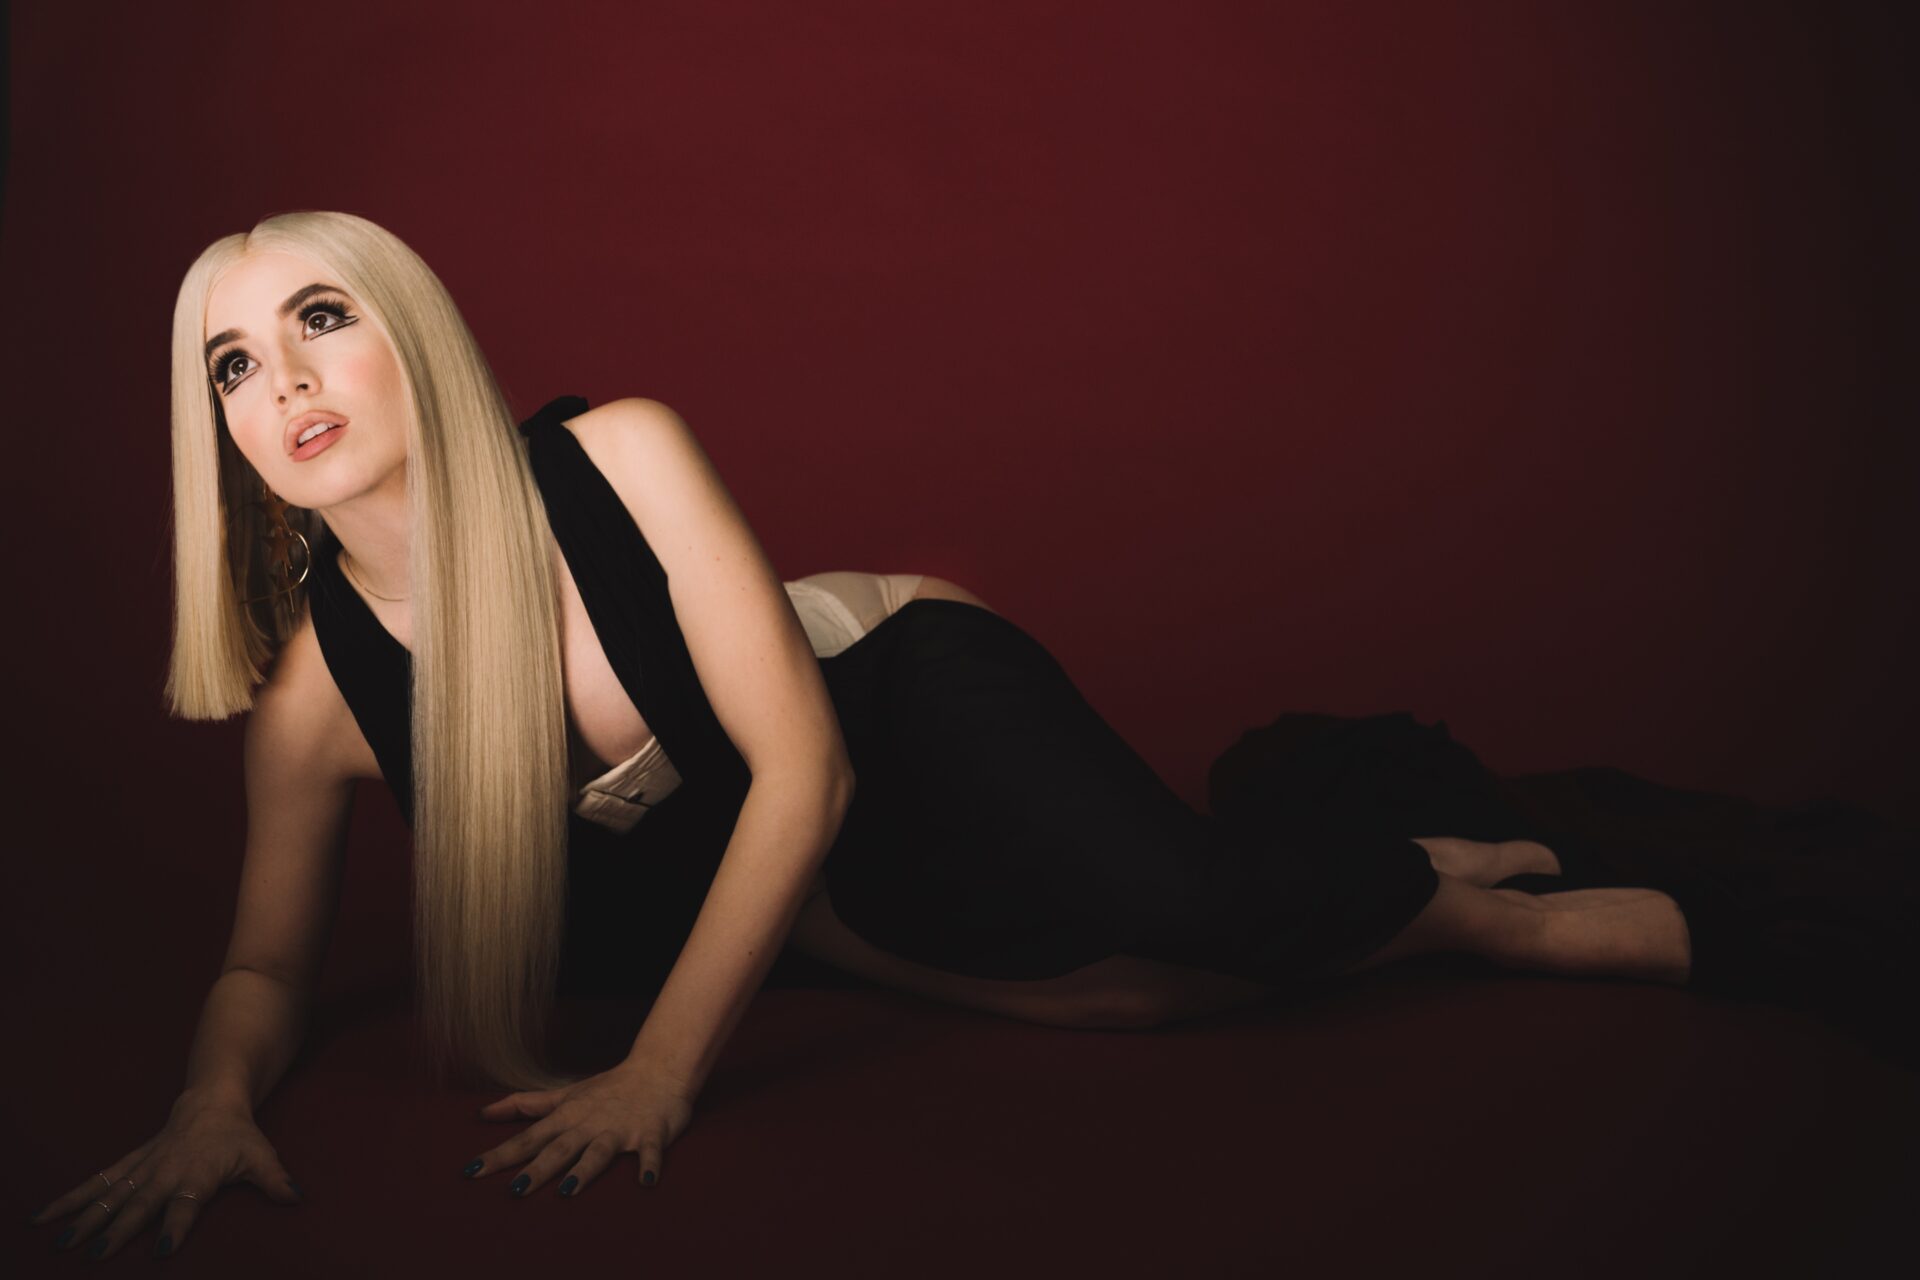 Ava Max releases “Freaking Me Out” and “Blood, Sweat & Tears”